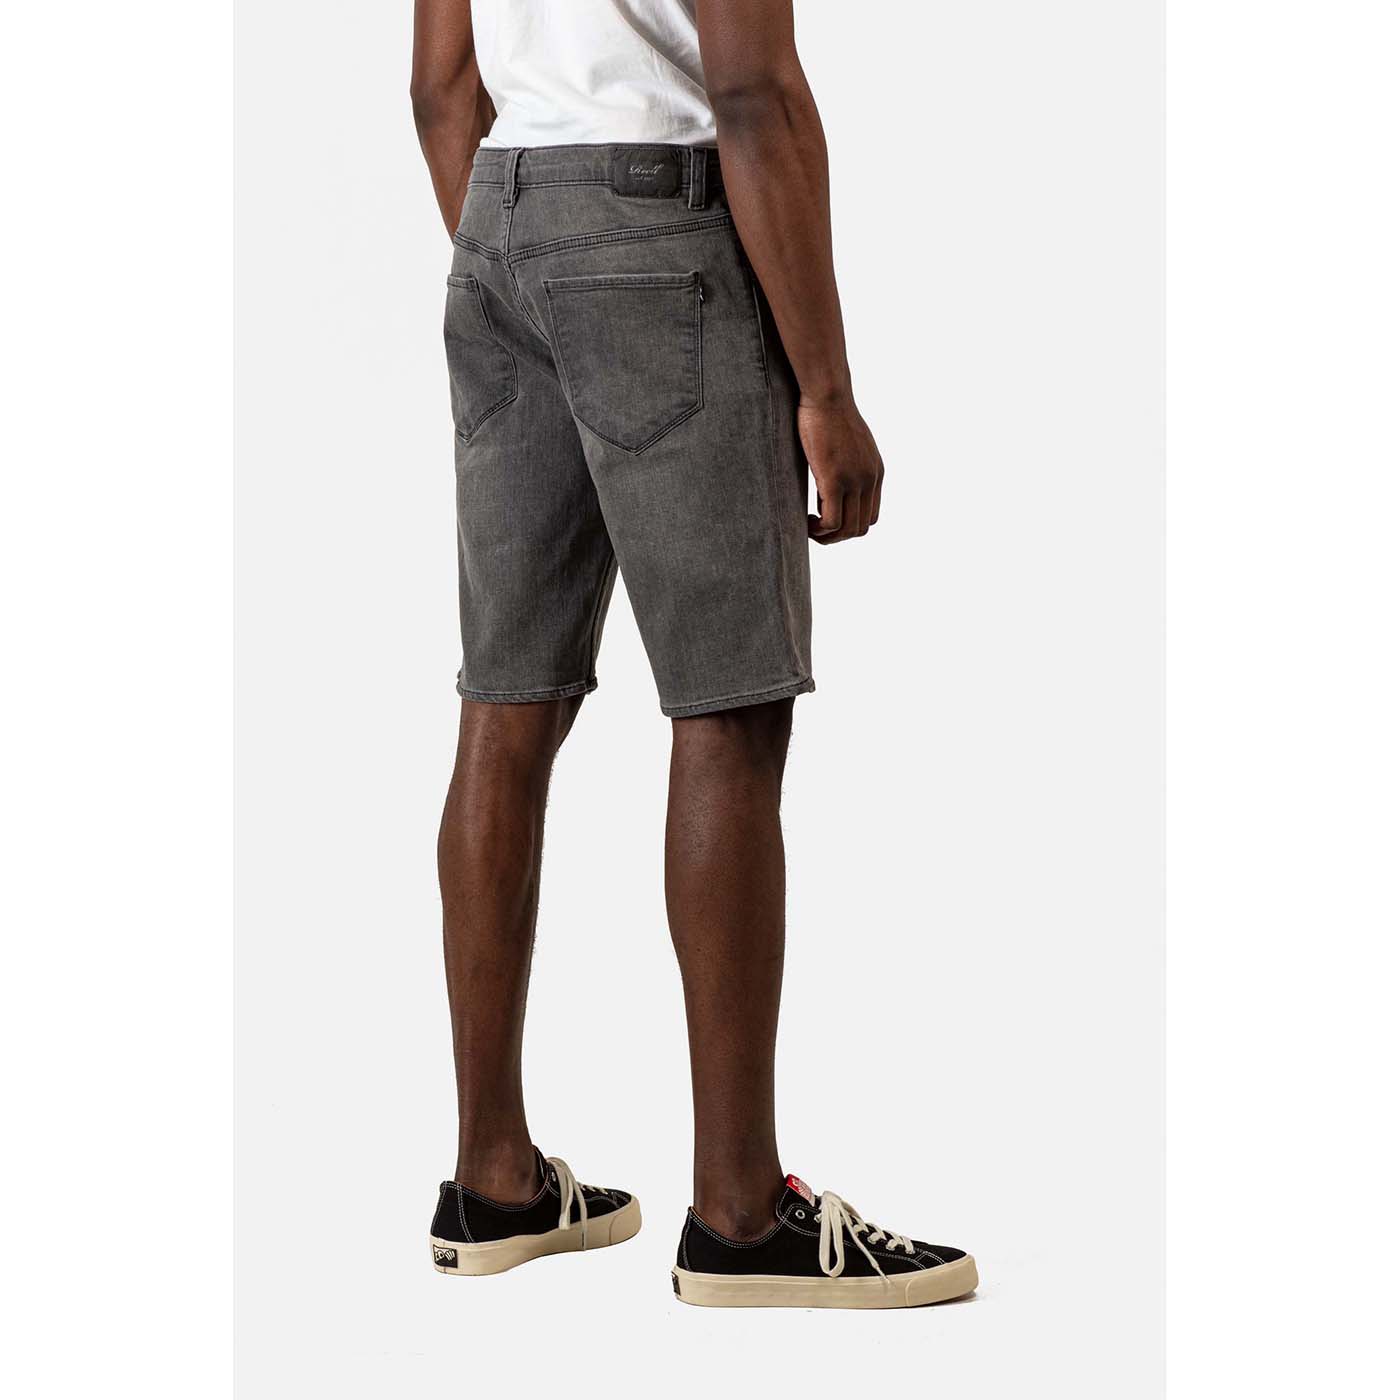 Reell Jeans Rafter Shorts 2 Slate Grey Wash